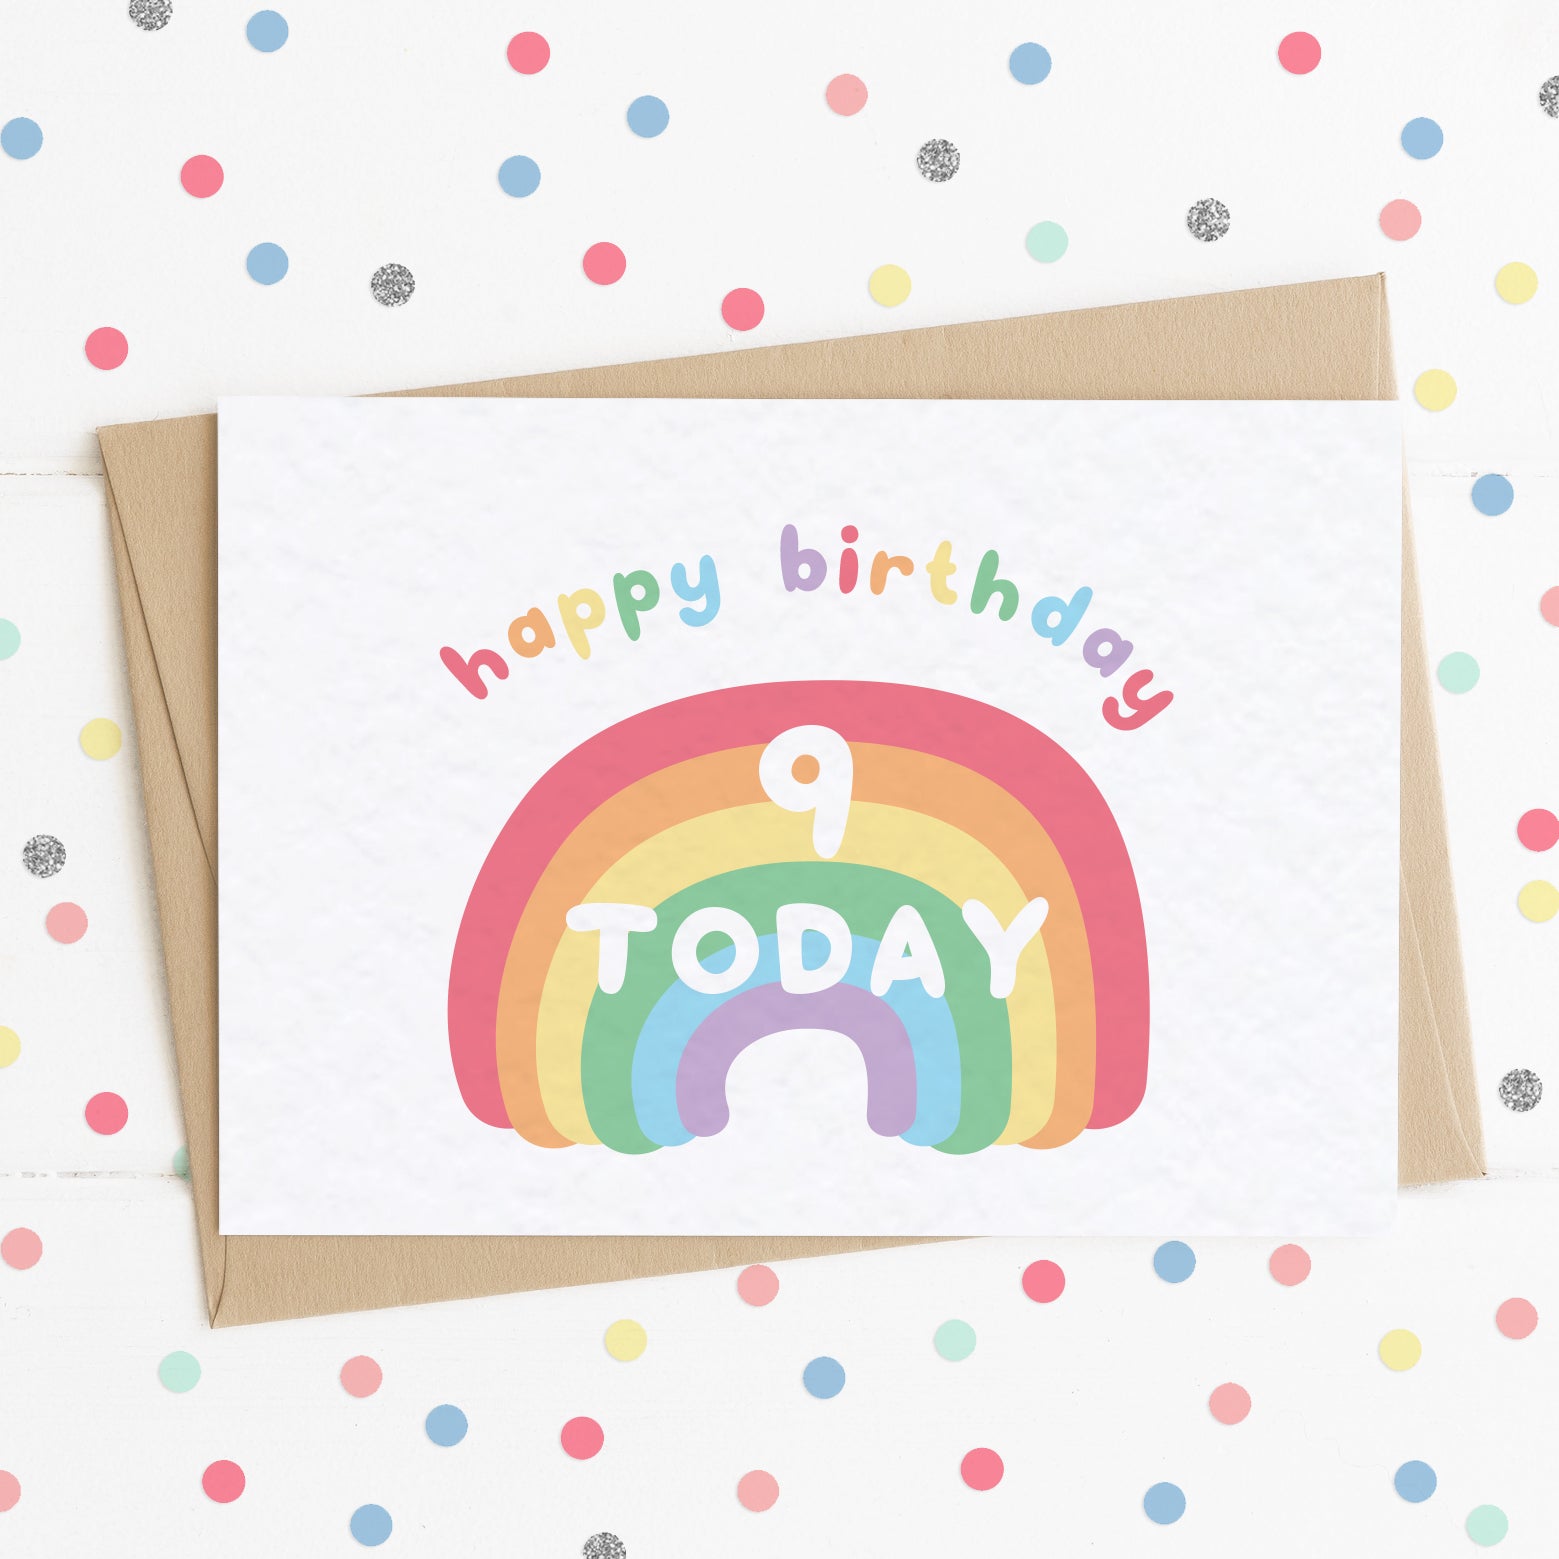 A cute milestone age birthday card with a smiling happy rainbow on it and the message "HAPPY BIRTHDAY - 9 TODAY".